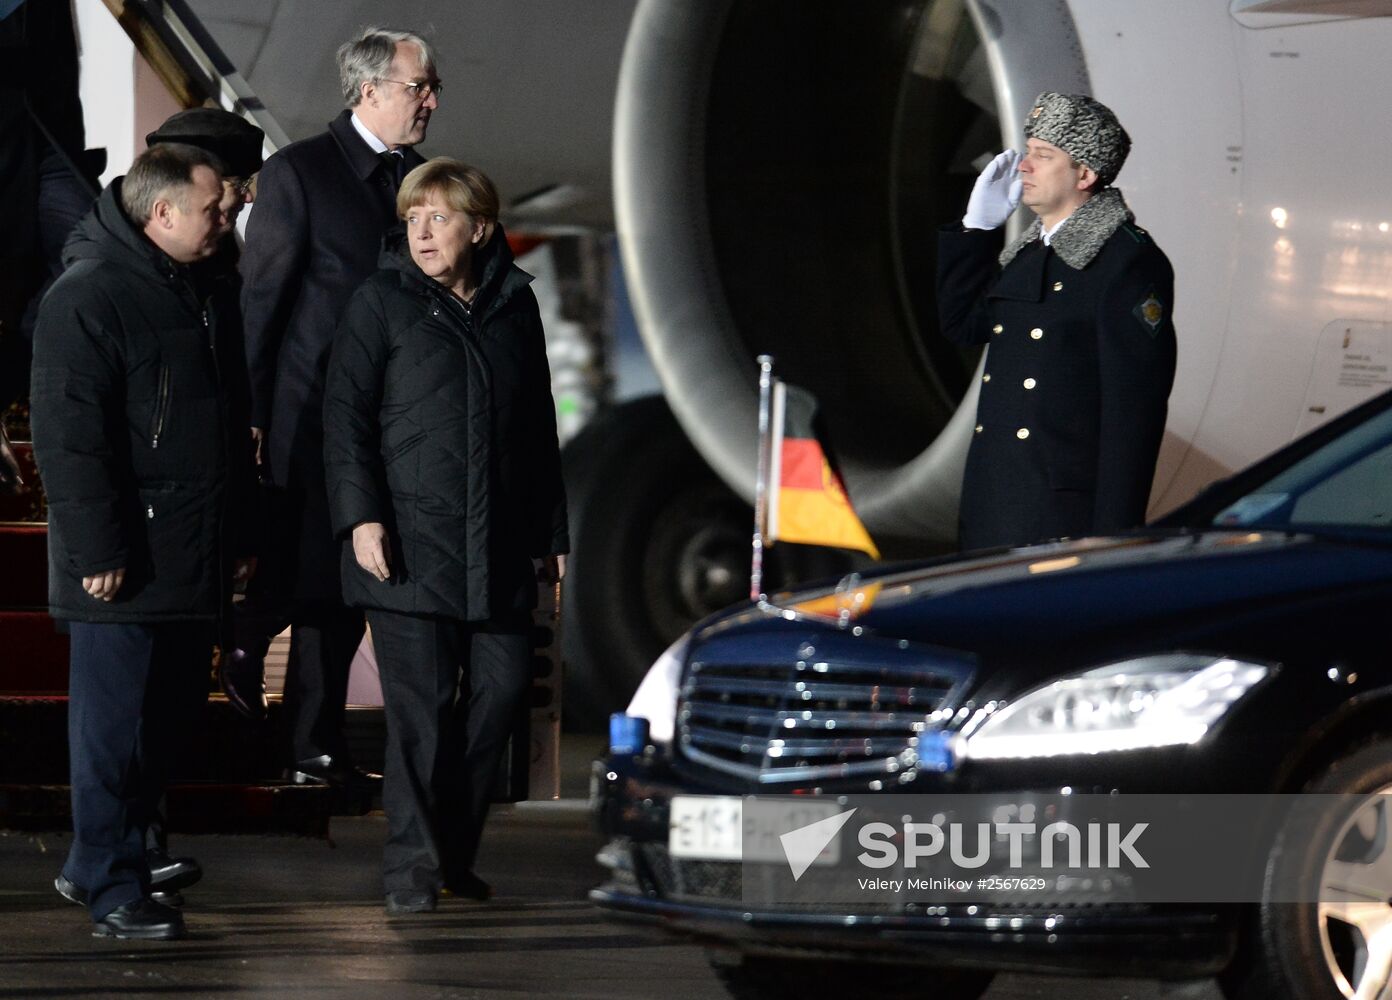 German Chancellor Merkel, French President Hollande arrive in Moscow